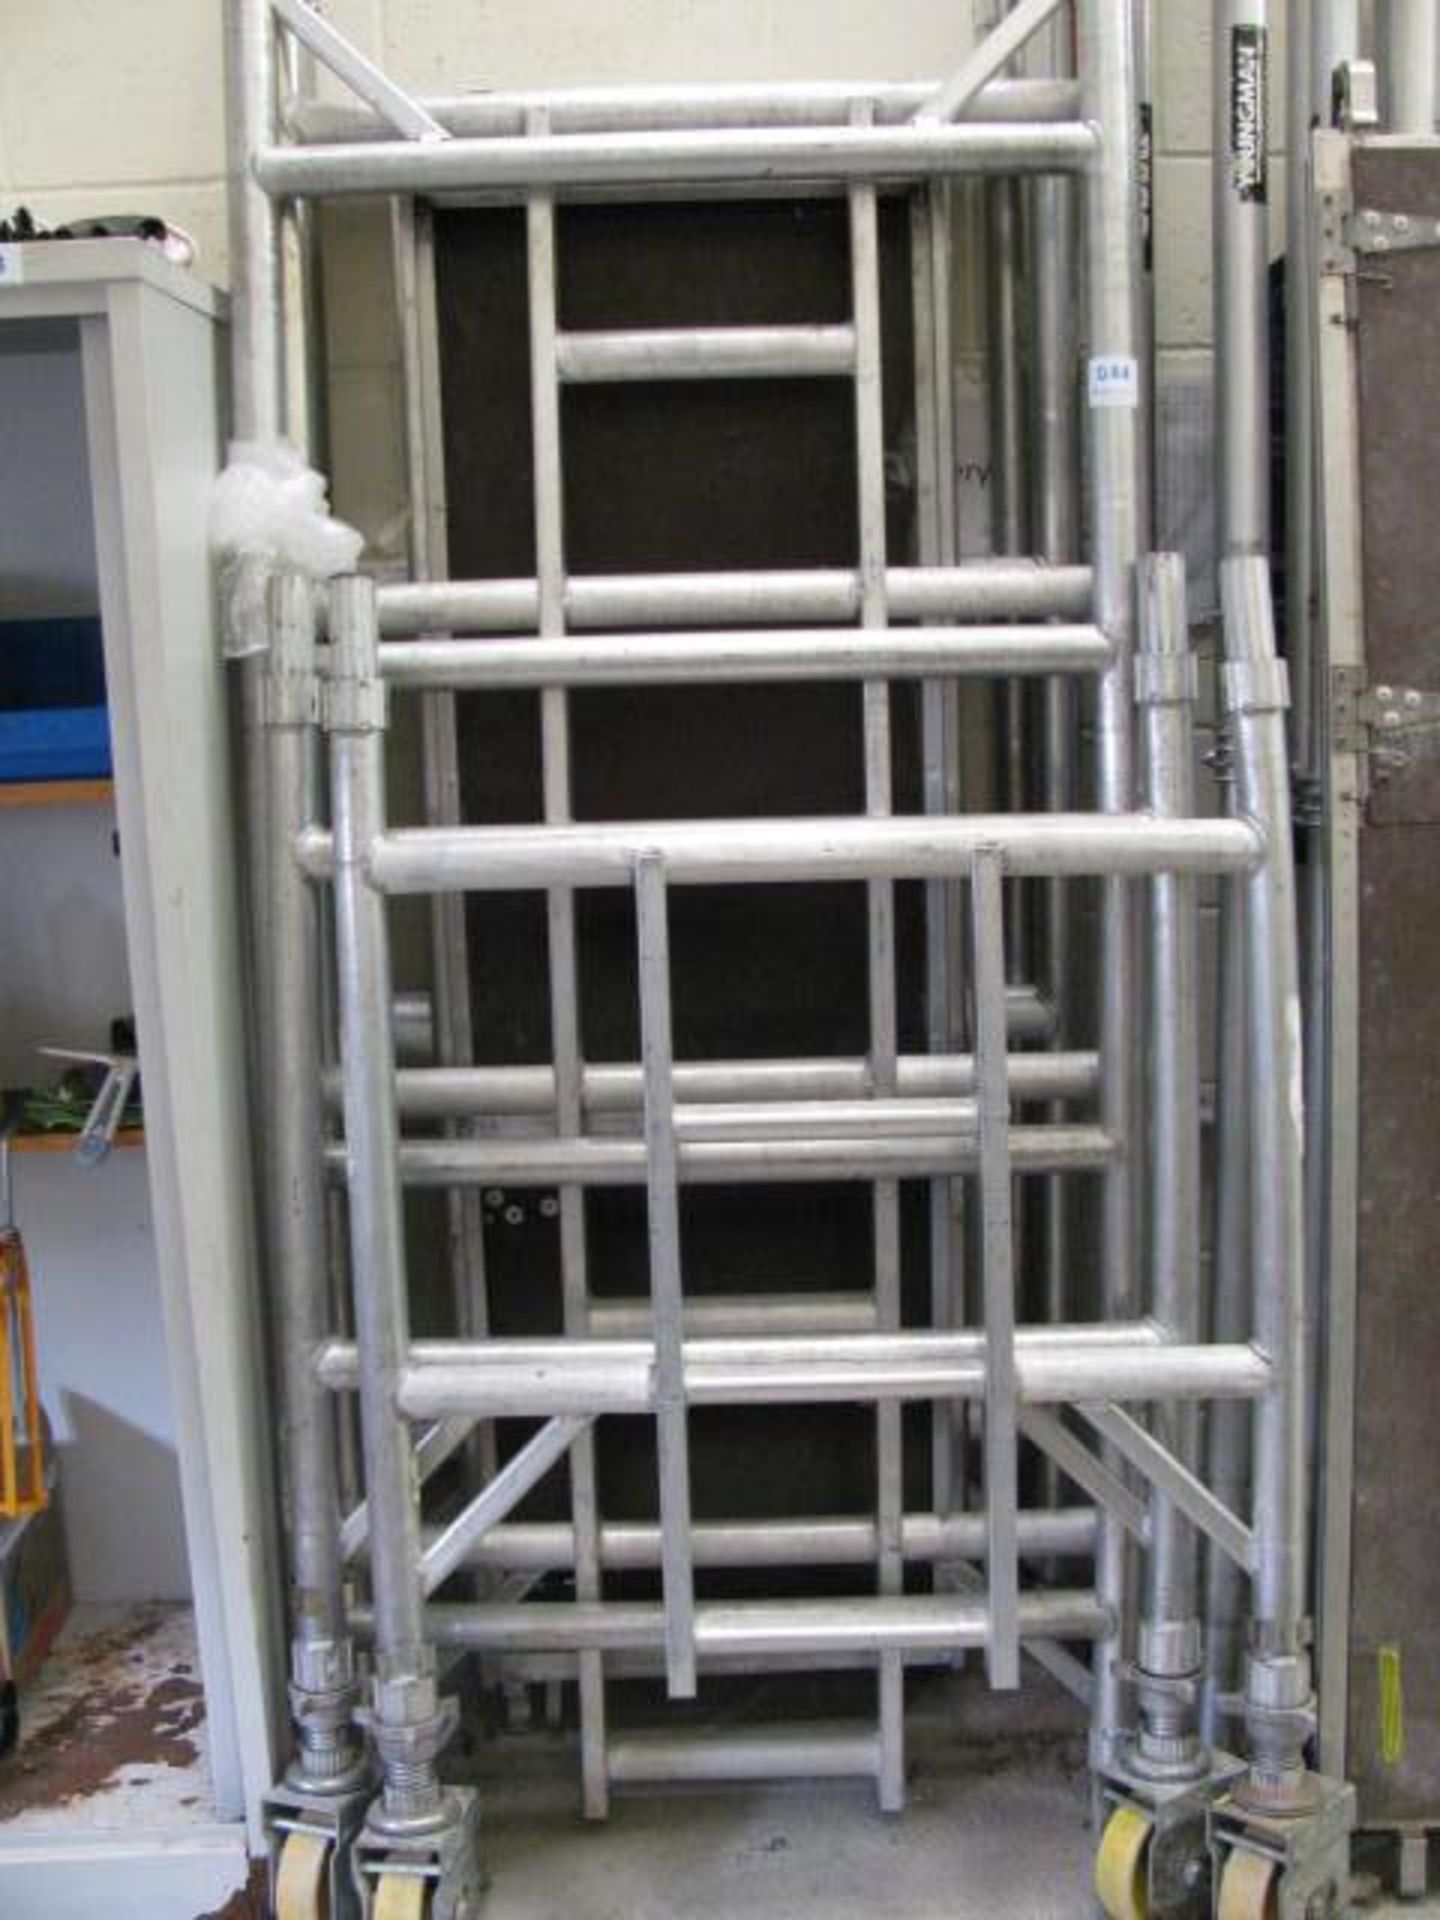 8m alloy access tower - Image 2 of 3